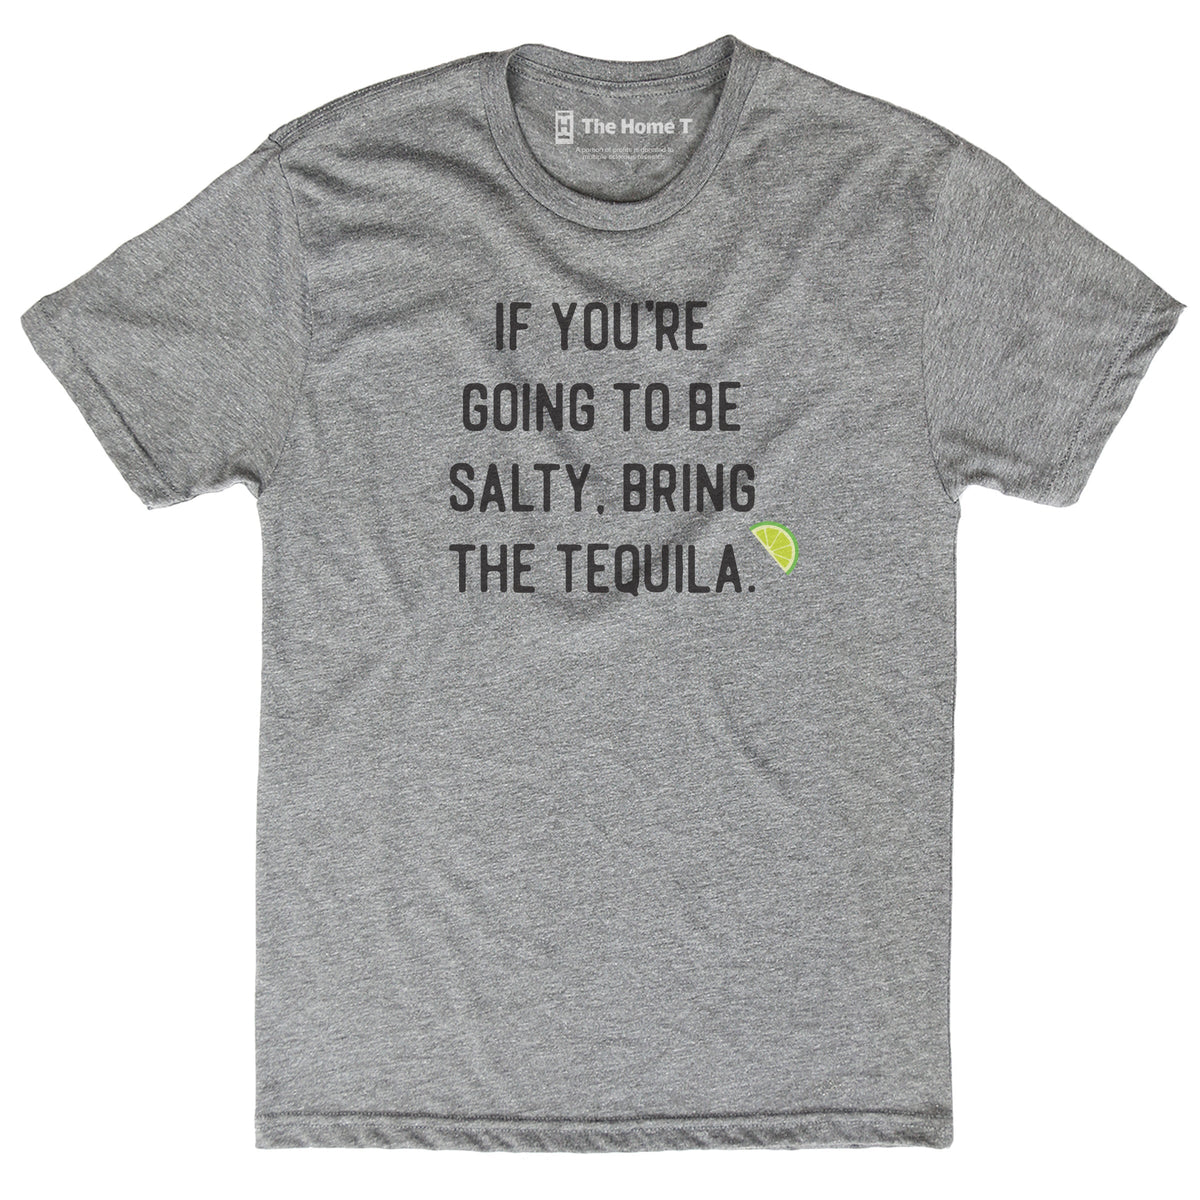 If You're Going to Be Salty, Bring the Tequila.